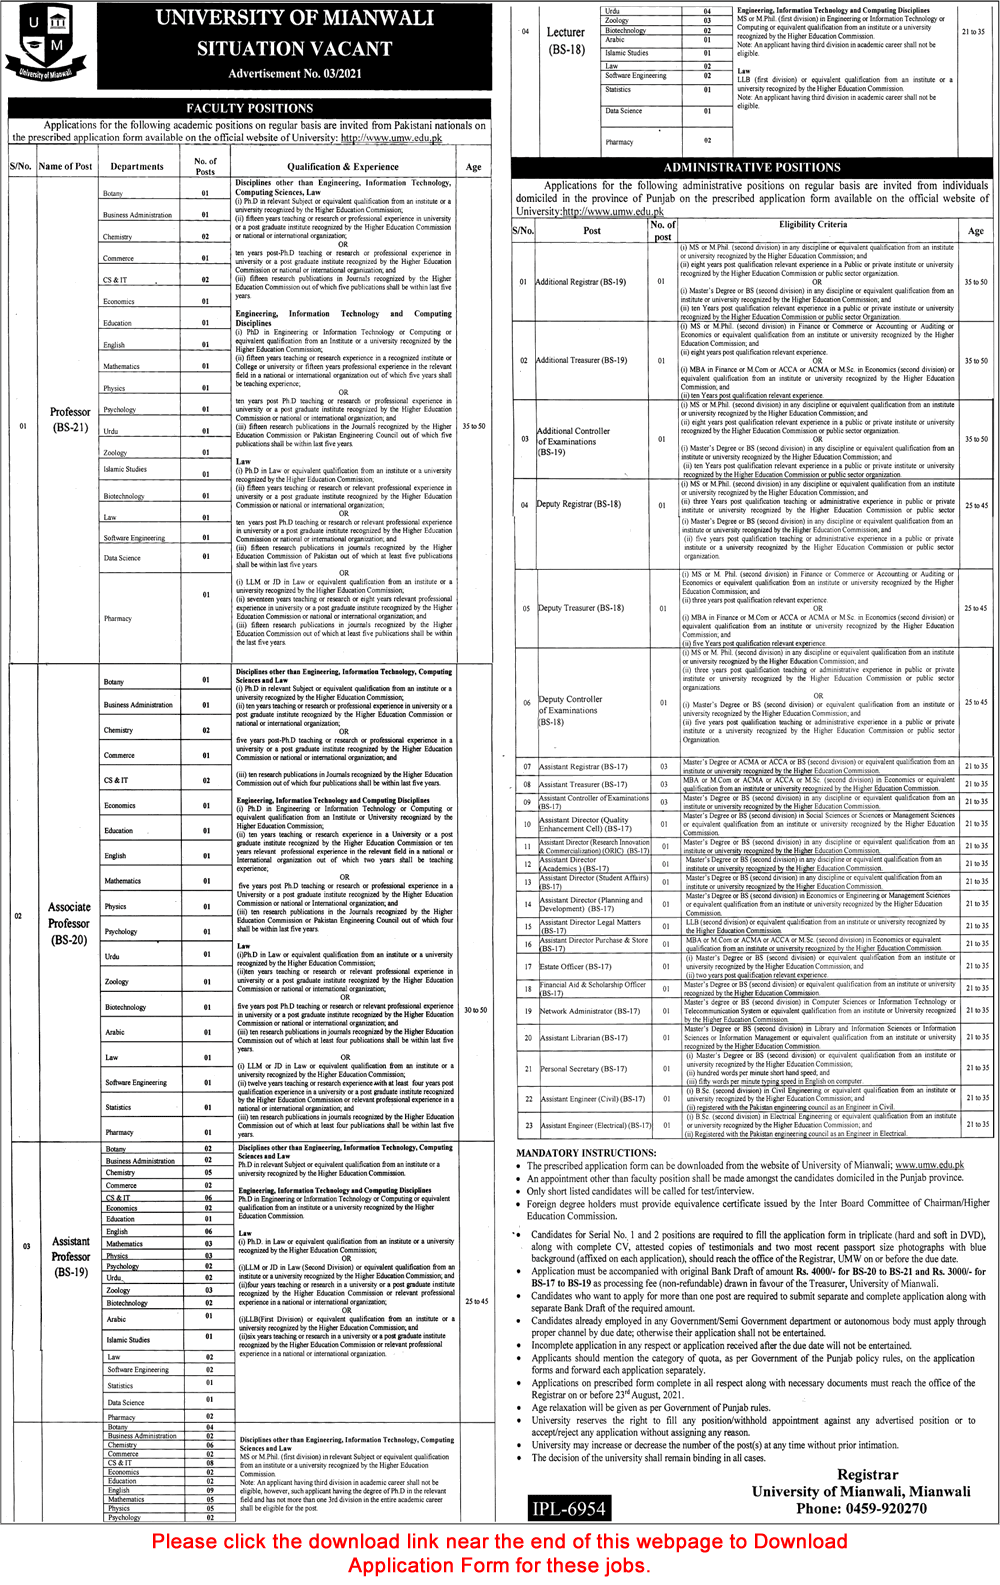 University of Mianwali Jobs July 2021 Application Form Download Teaching Faculty & Others Latest